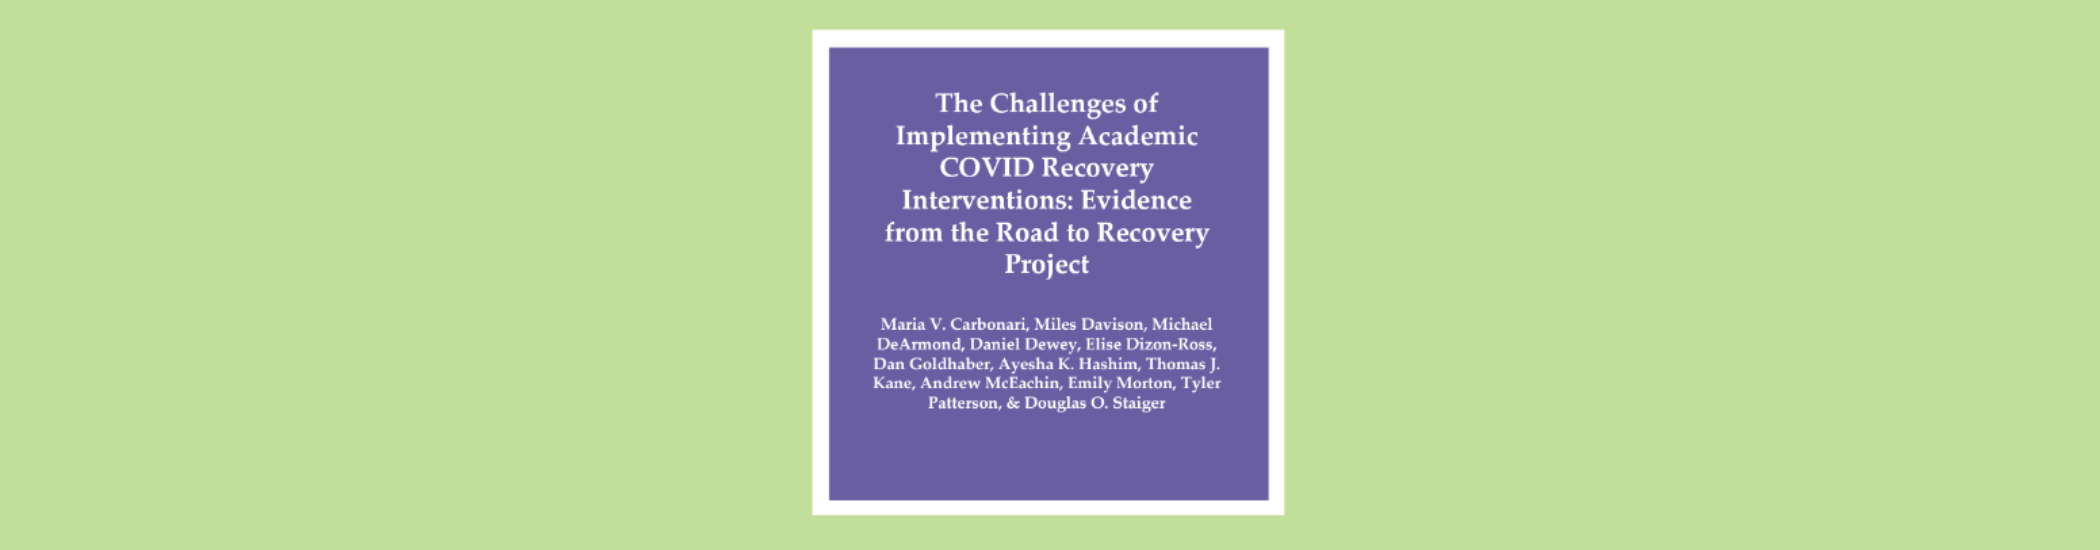 Cover of latest working paper | The Challenges of Implementing Academic COVID Recovery Interventions: Evidence from the Road to Recovery Project